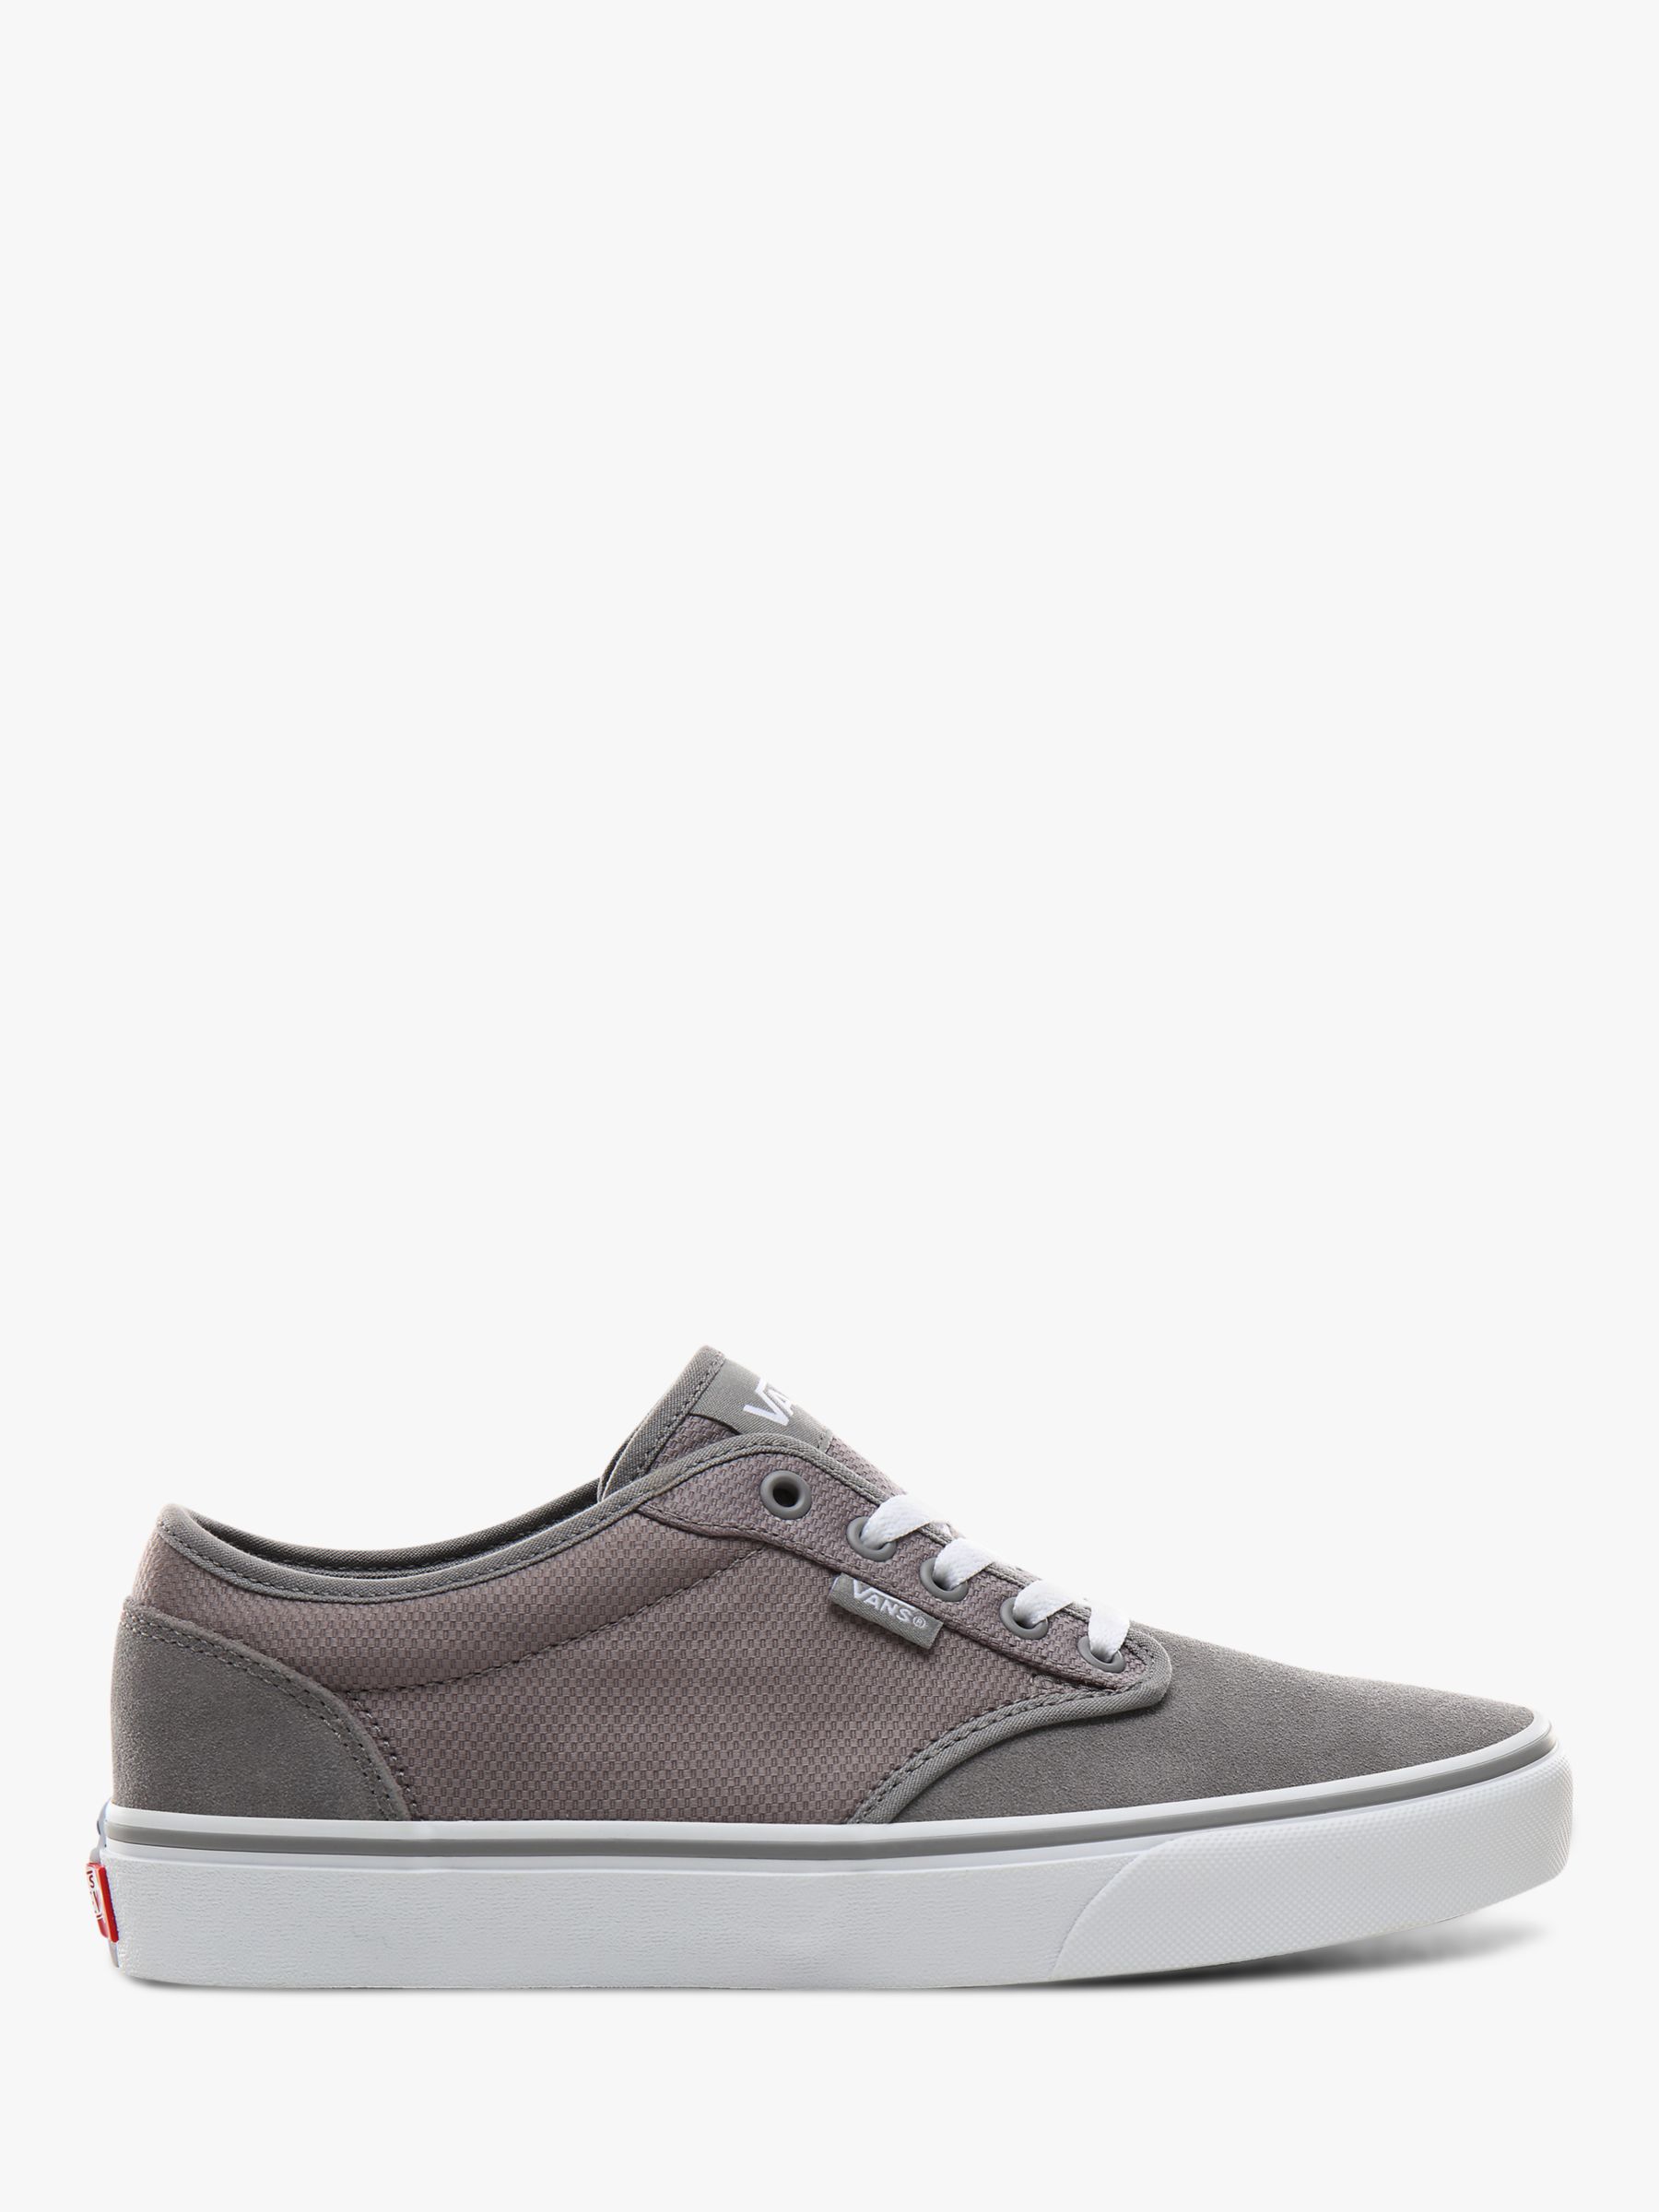 Vans Atwood Suede Trainers, Grey/White